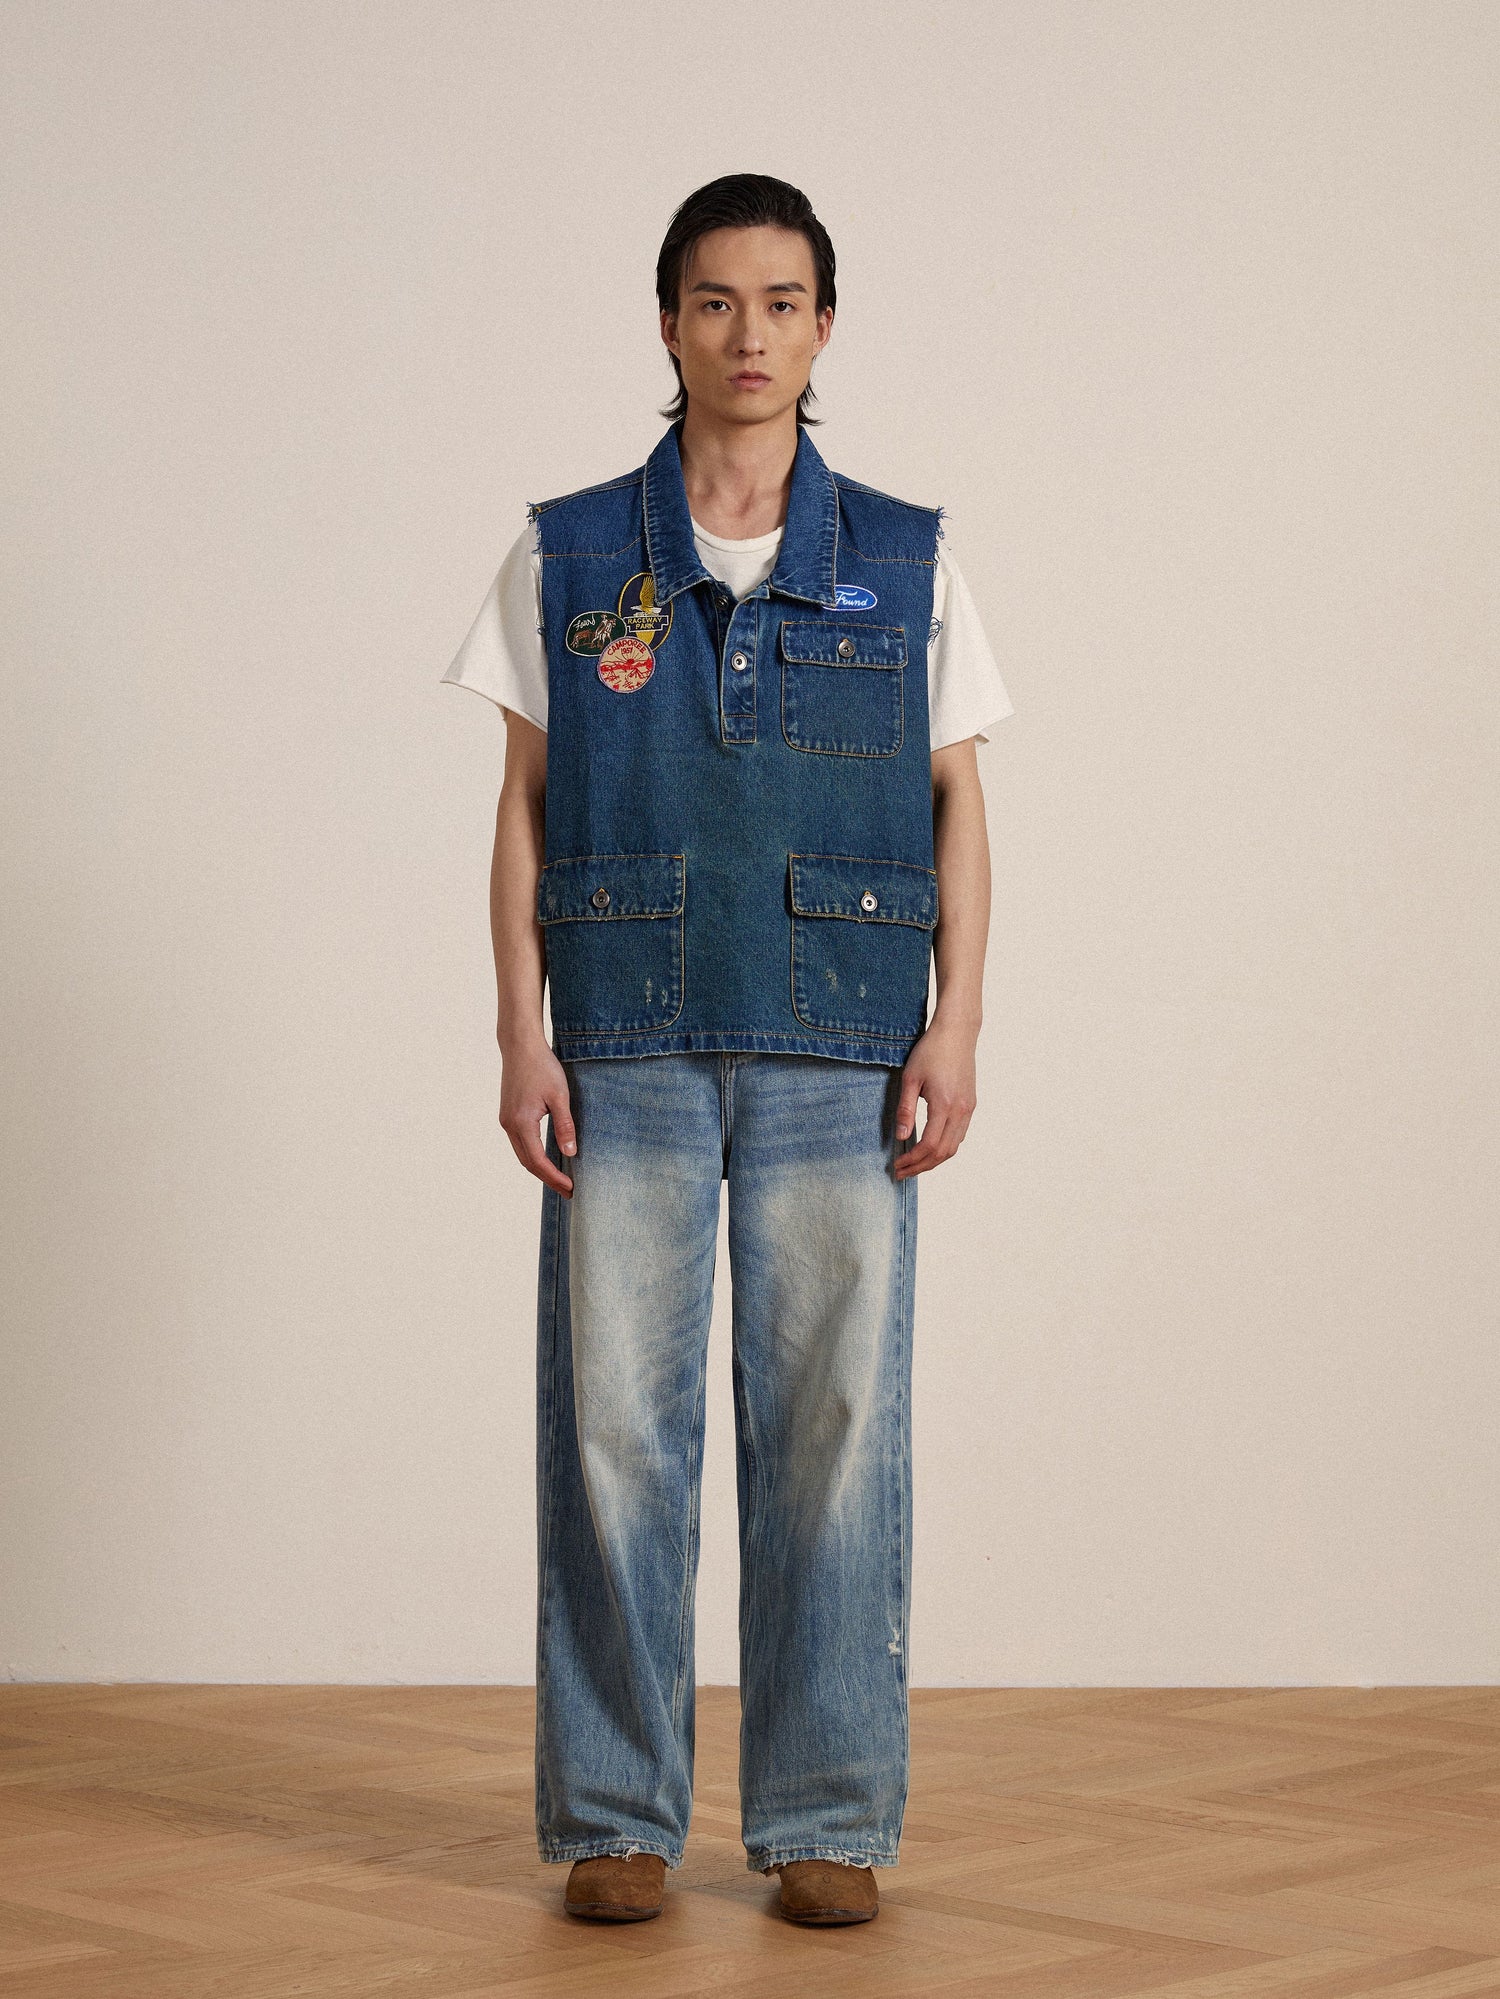 A man wearing a Found Raw Cut Patch Mechanic Denim Vest and jeans.